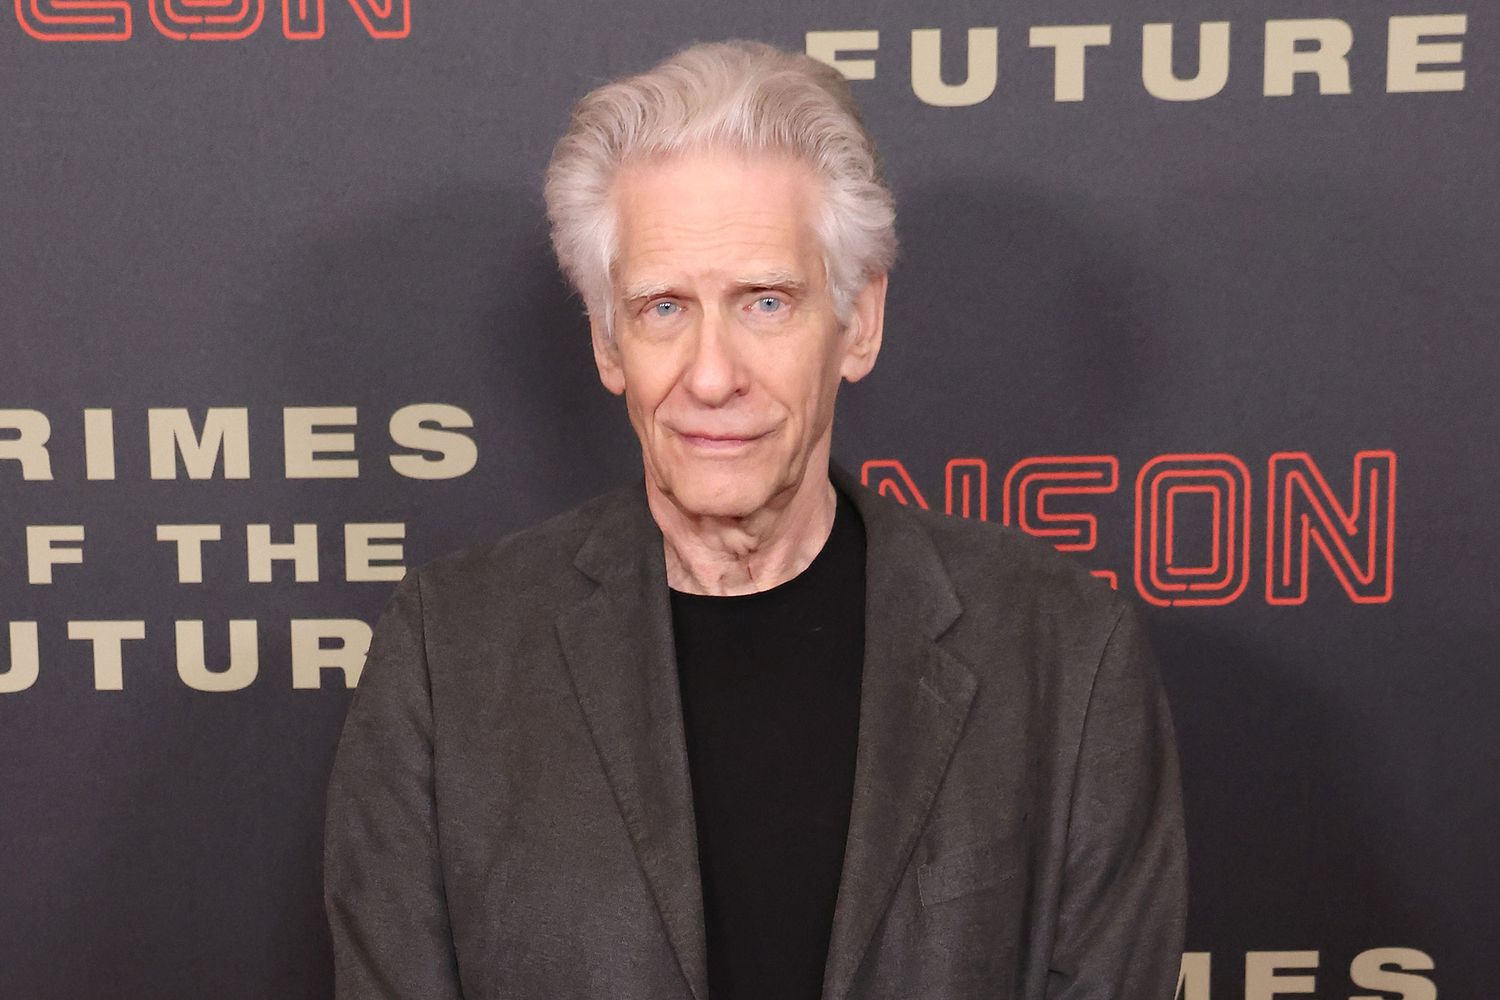 David Cronenberg attends the New York premiere of "Crimes of the Future" at Walter Reade Theater on June 02, 2022 in New York City.